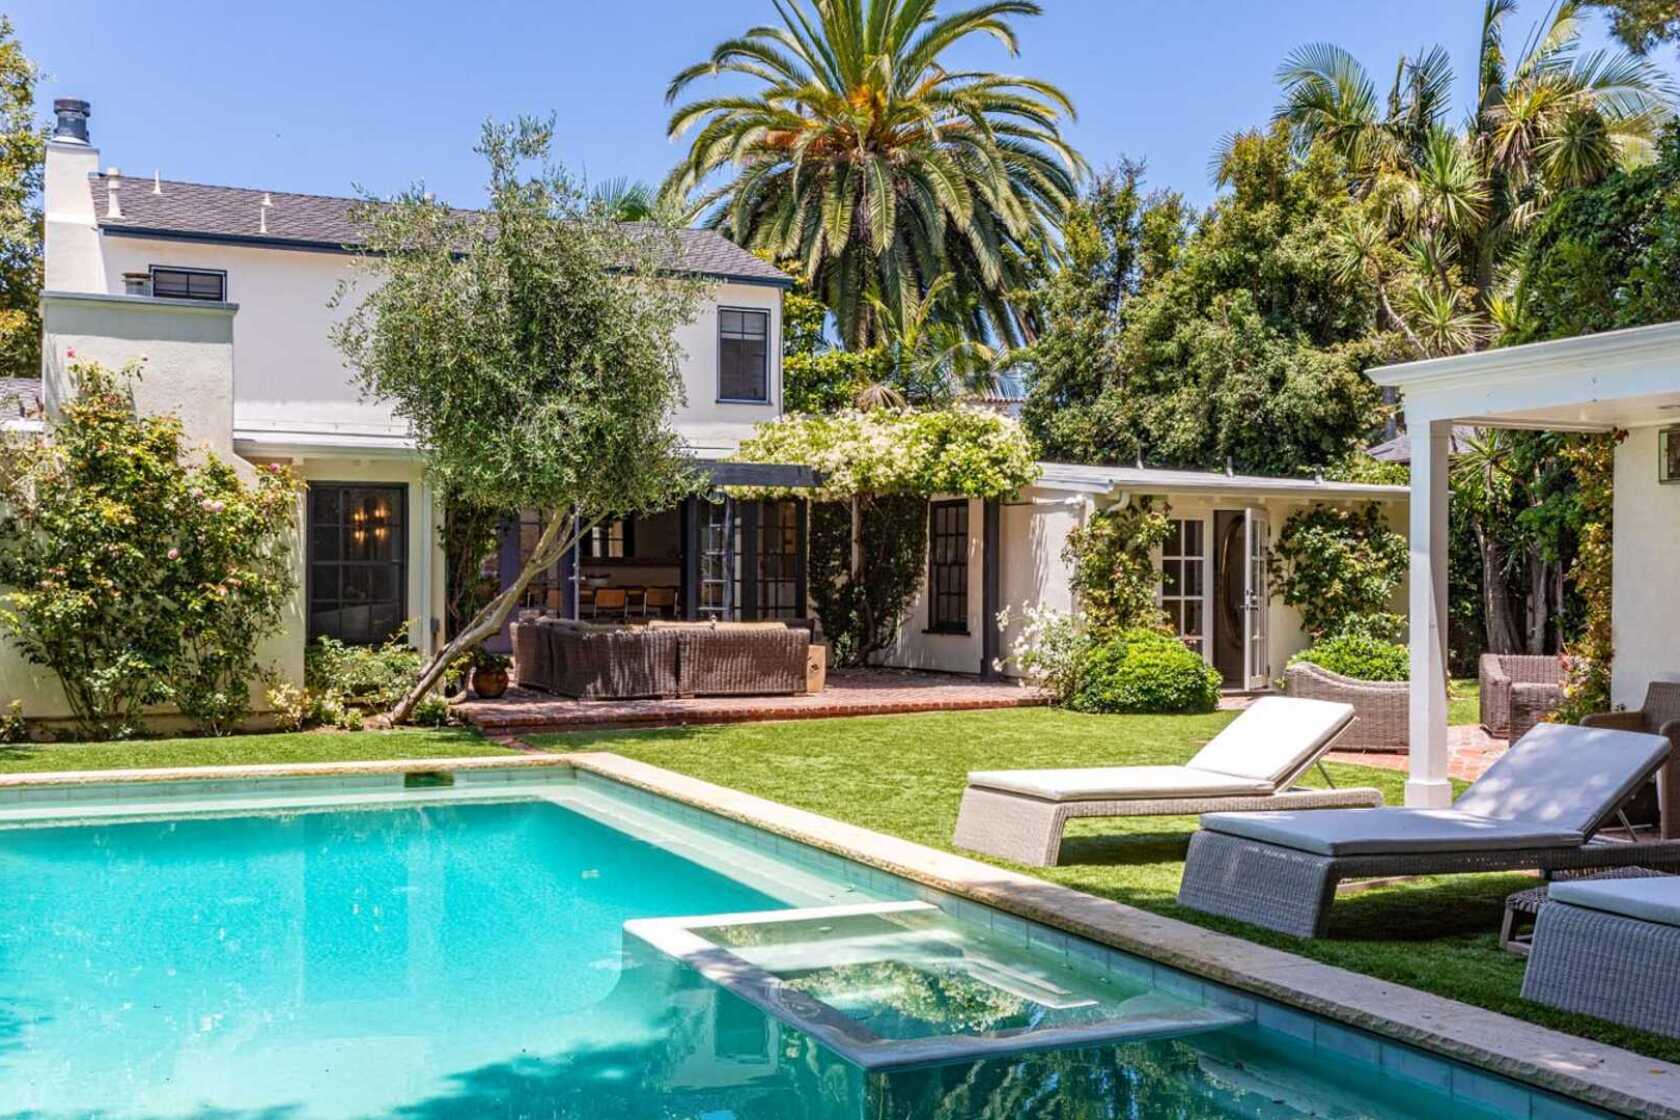 Jonah Hill buys a Monterey Colonial-style home in Santa Monica for $6. ...